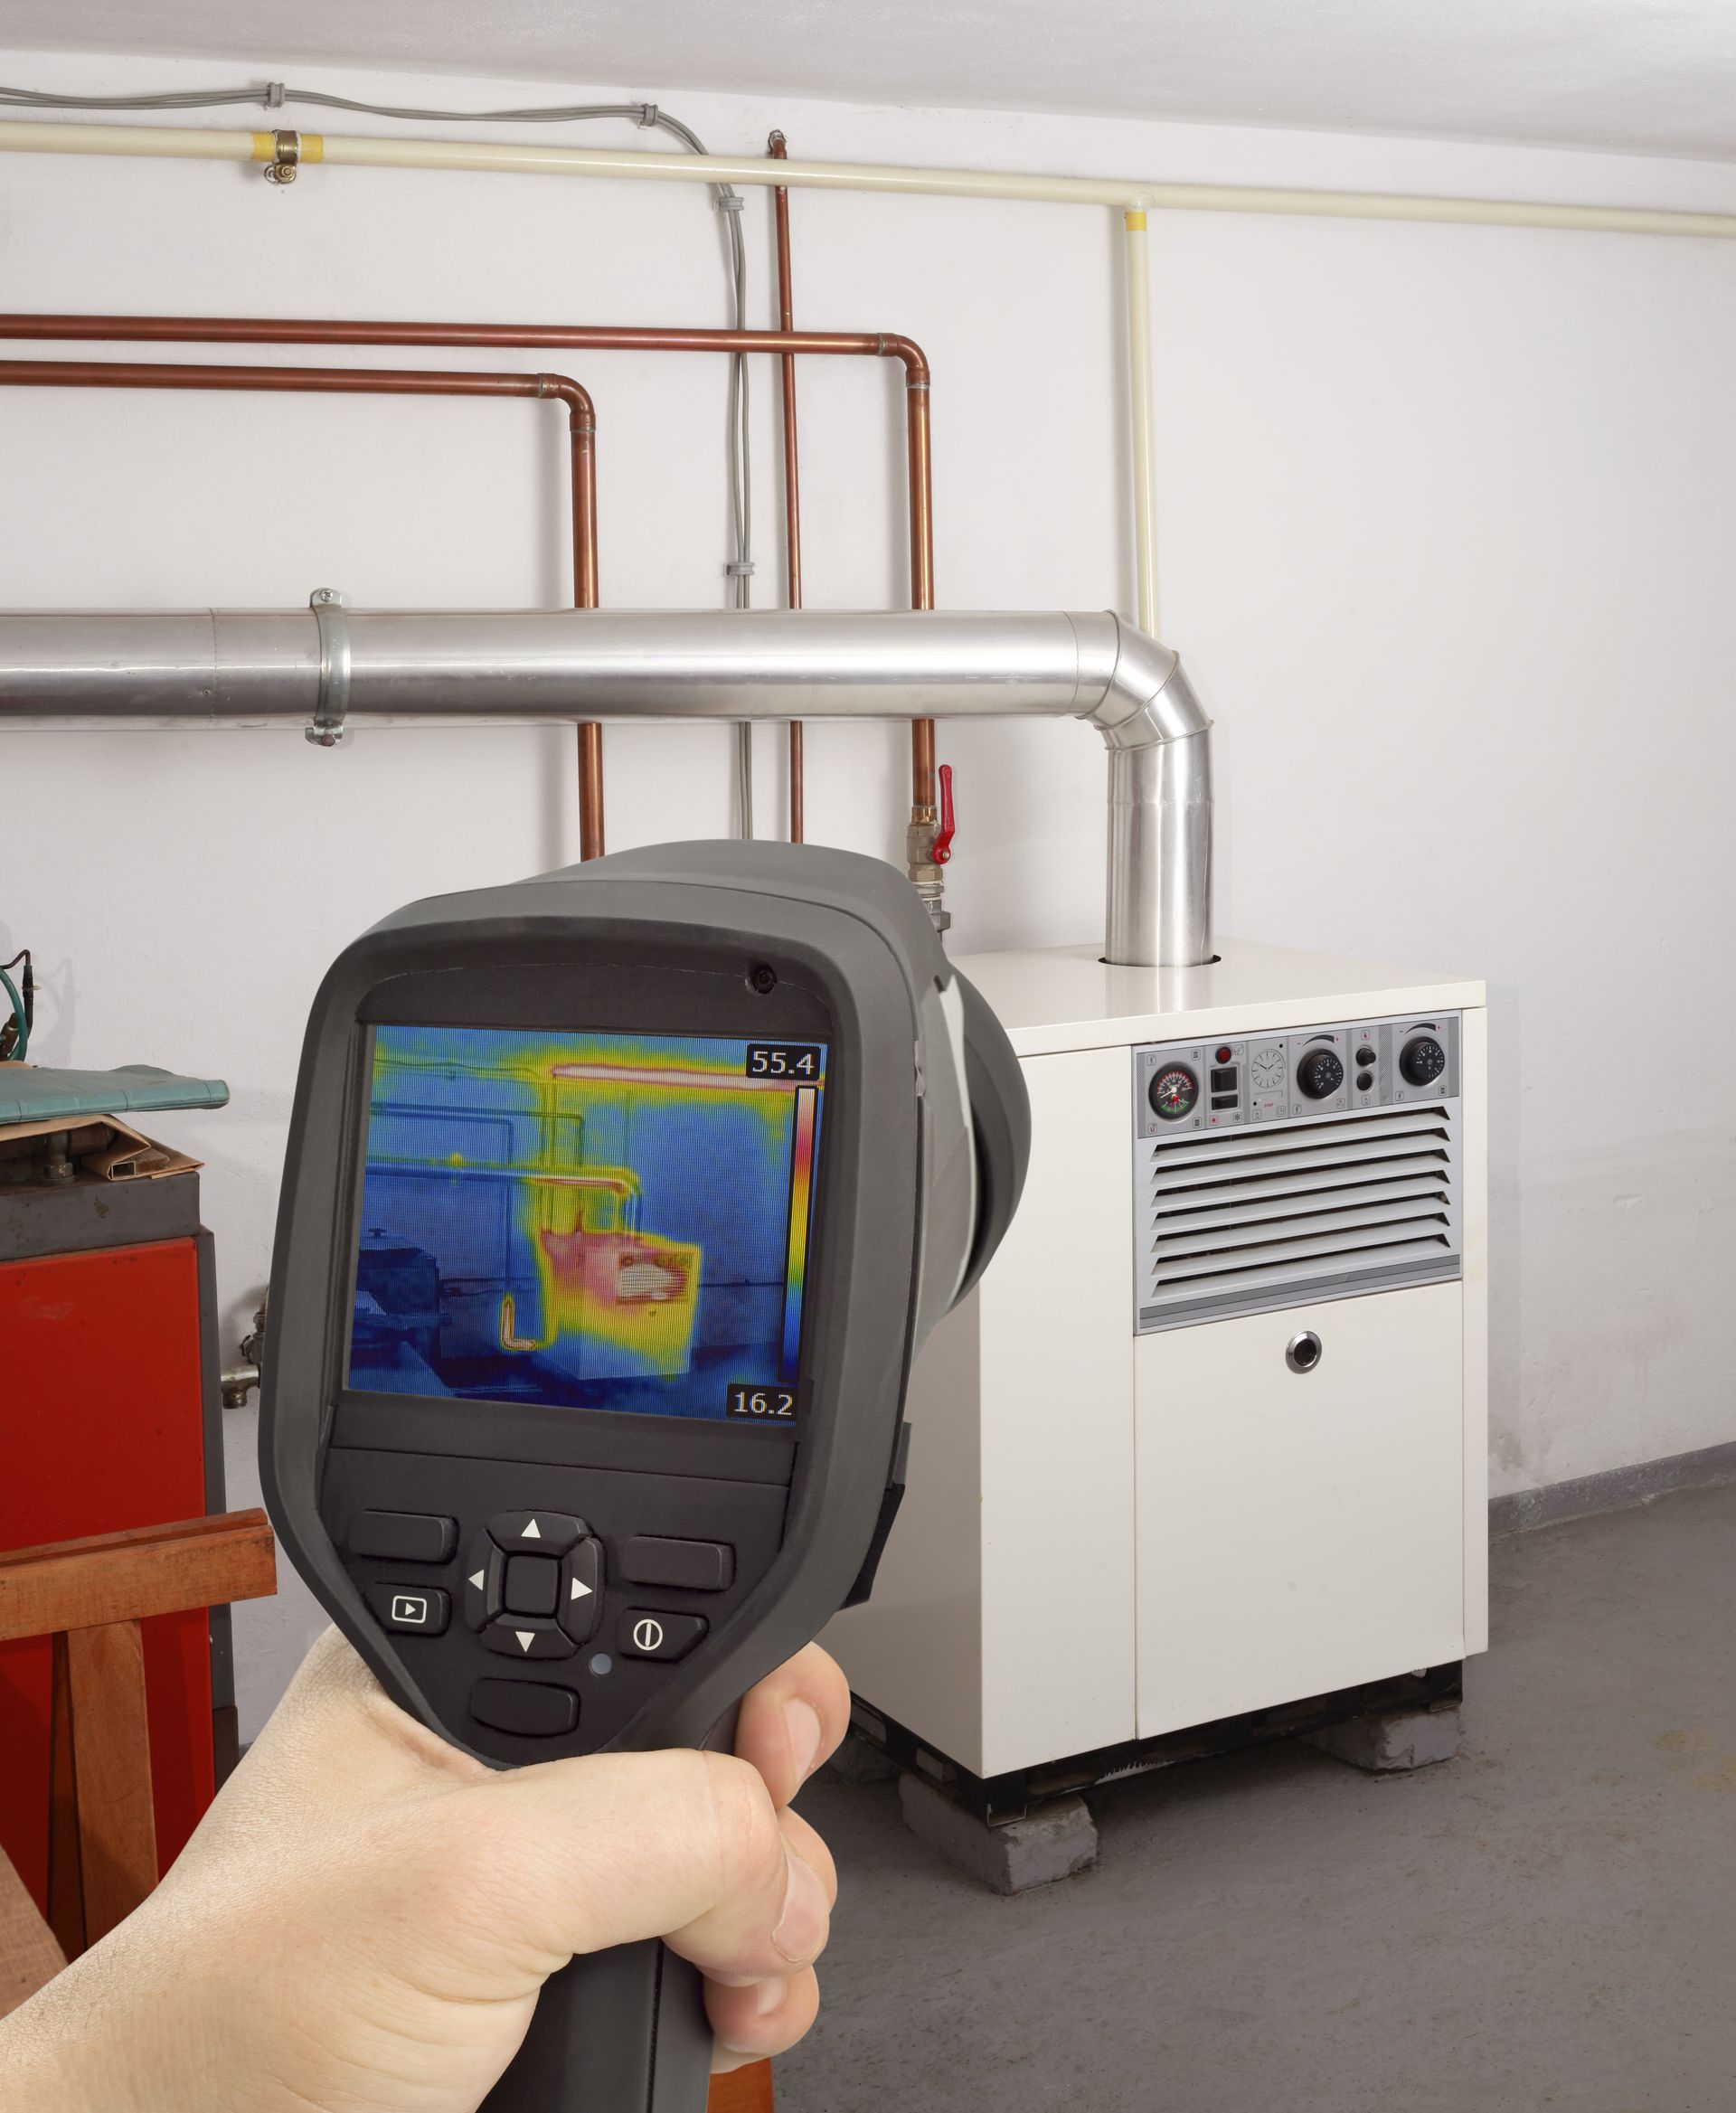 a person is holding a thermal camera in front of a boiler